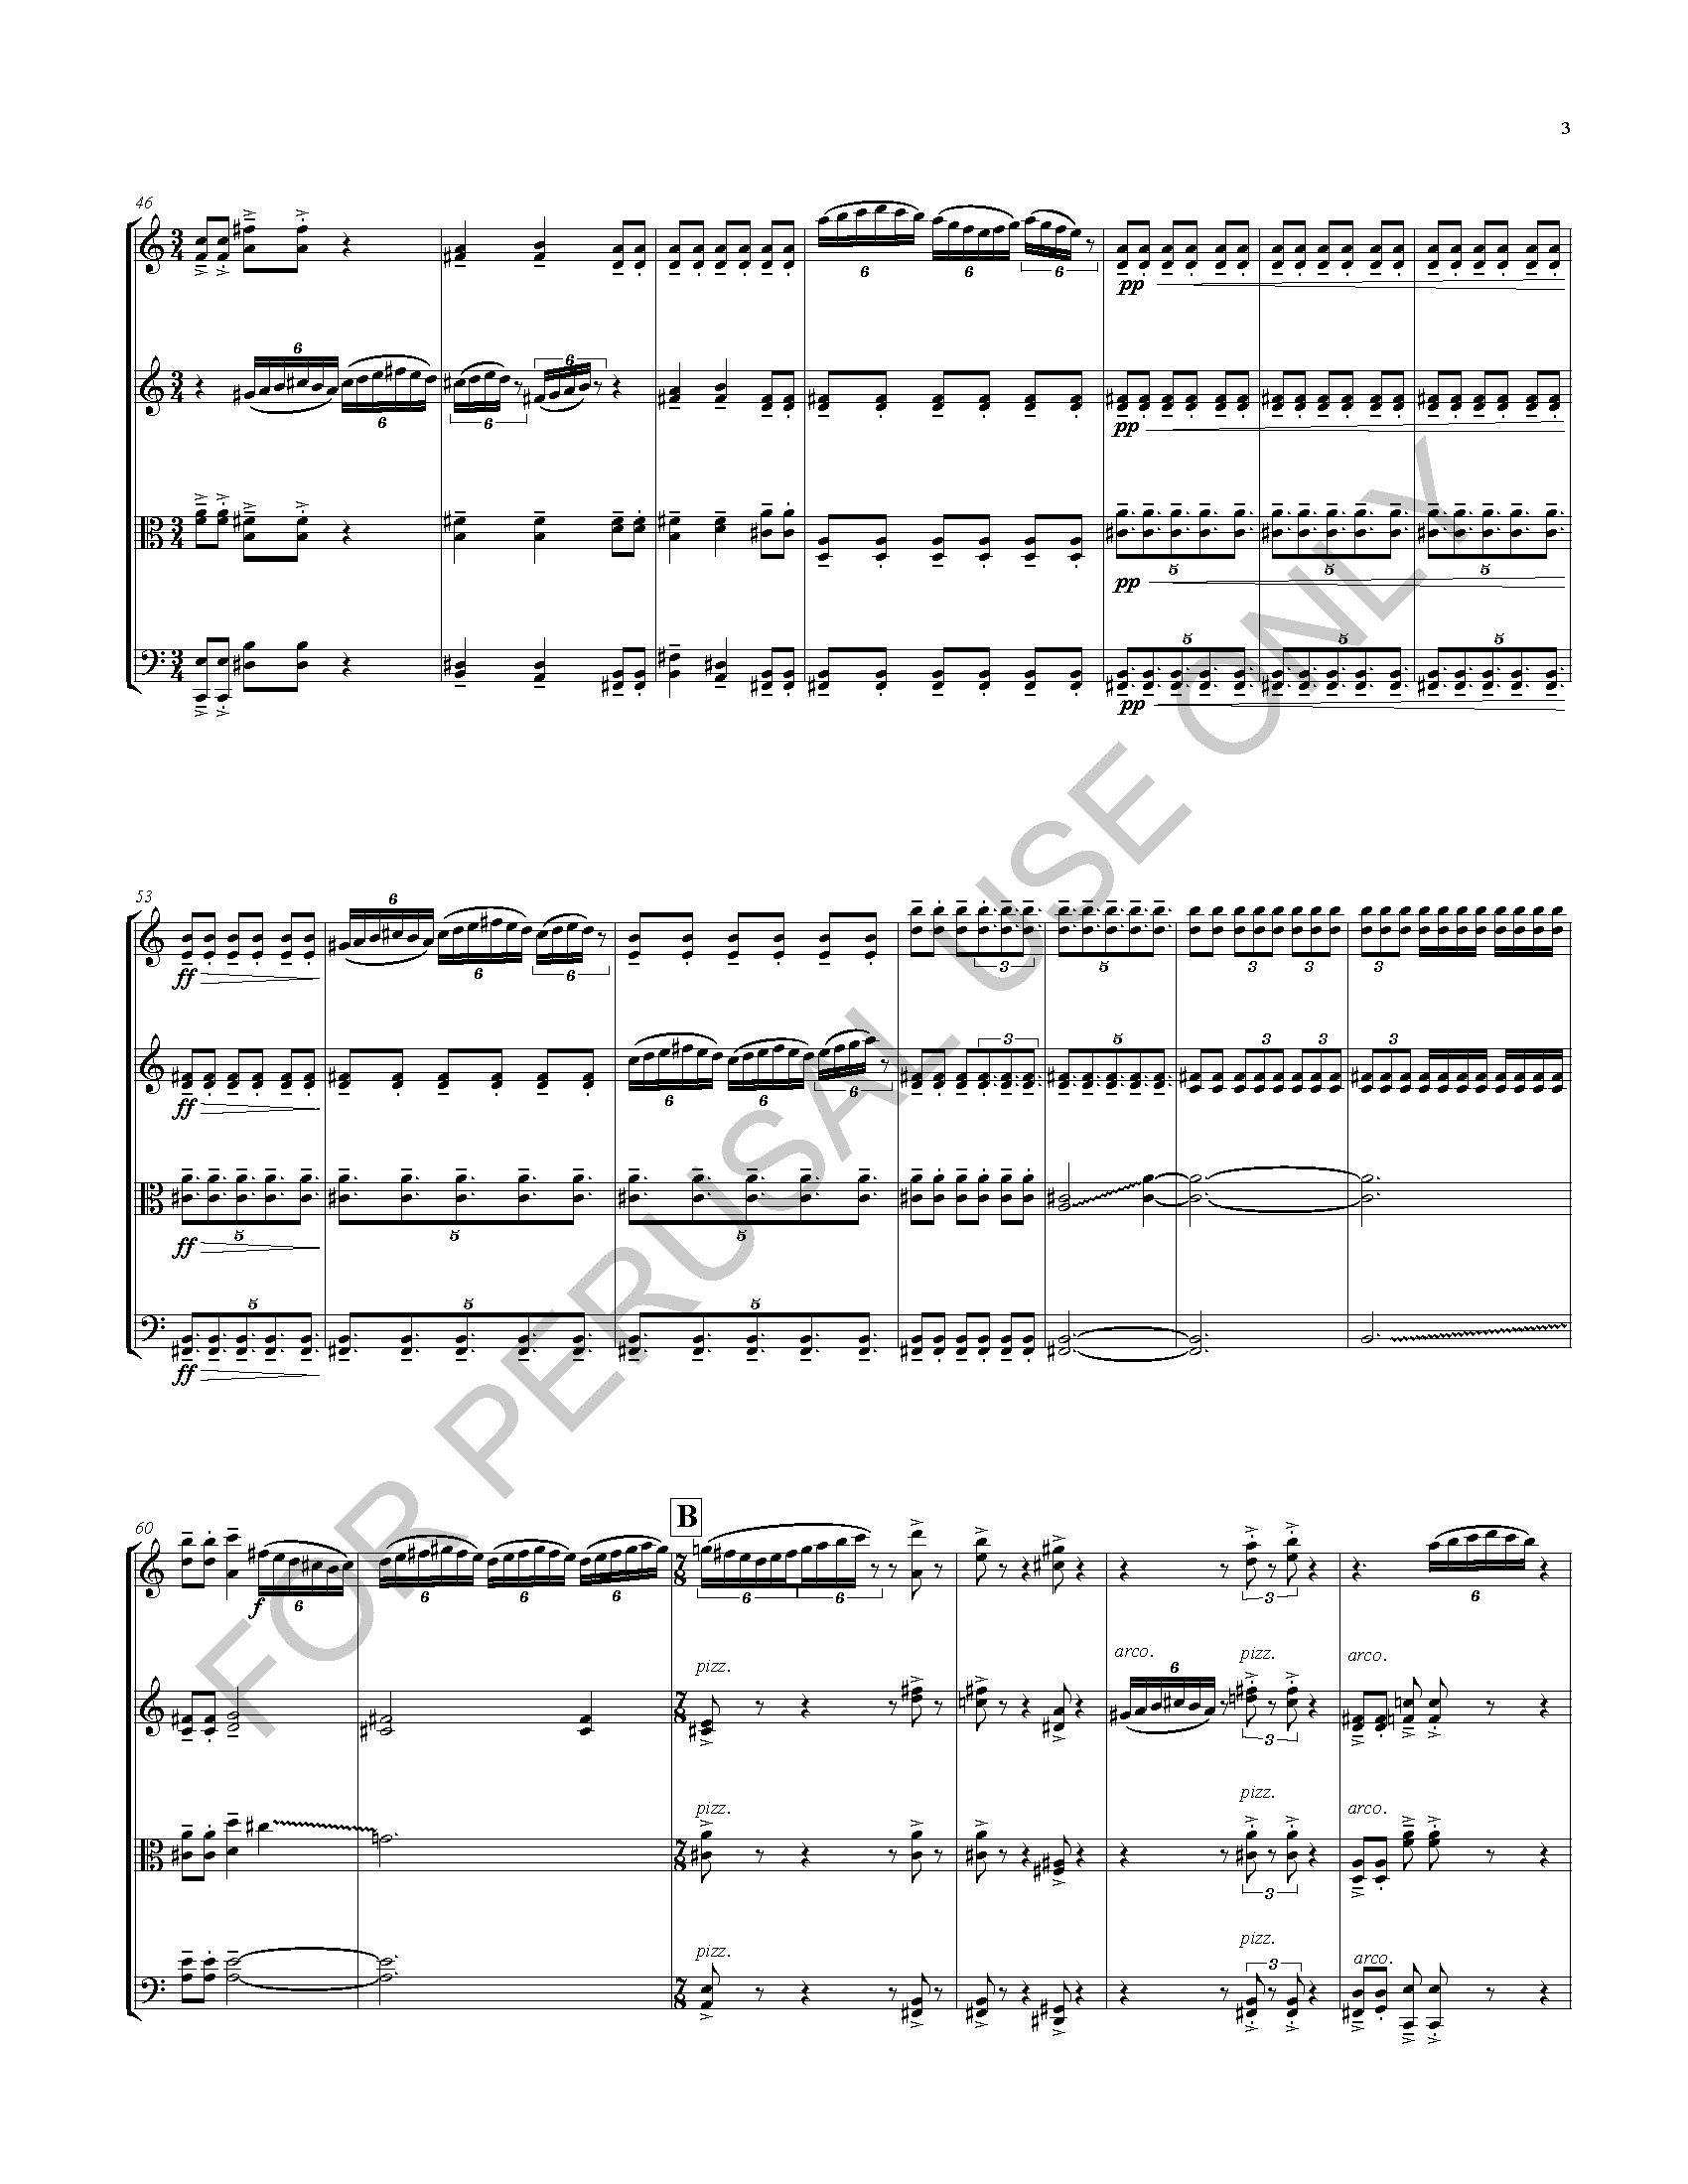 REFERENCE Smear Music (Full Score)_Page_03.jpg